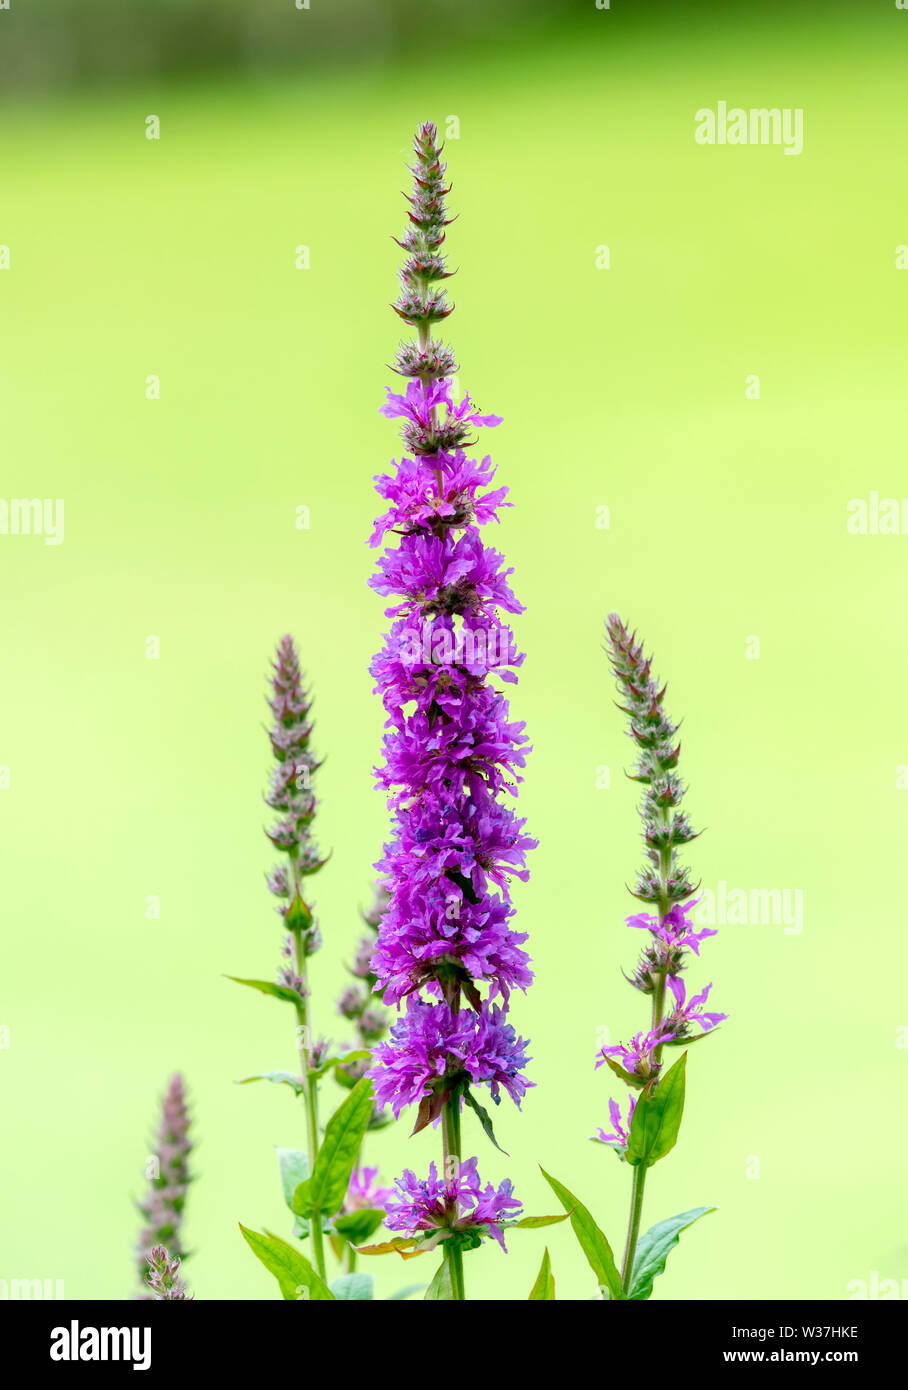 Flower spikes of Purple Loosestrife (Lythrum salicaria) against an out of focus green background Stock Photo